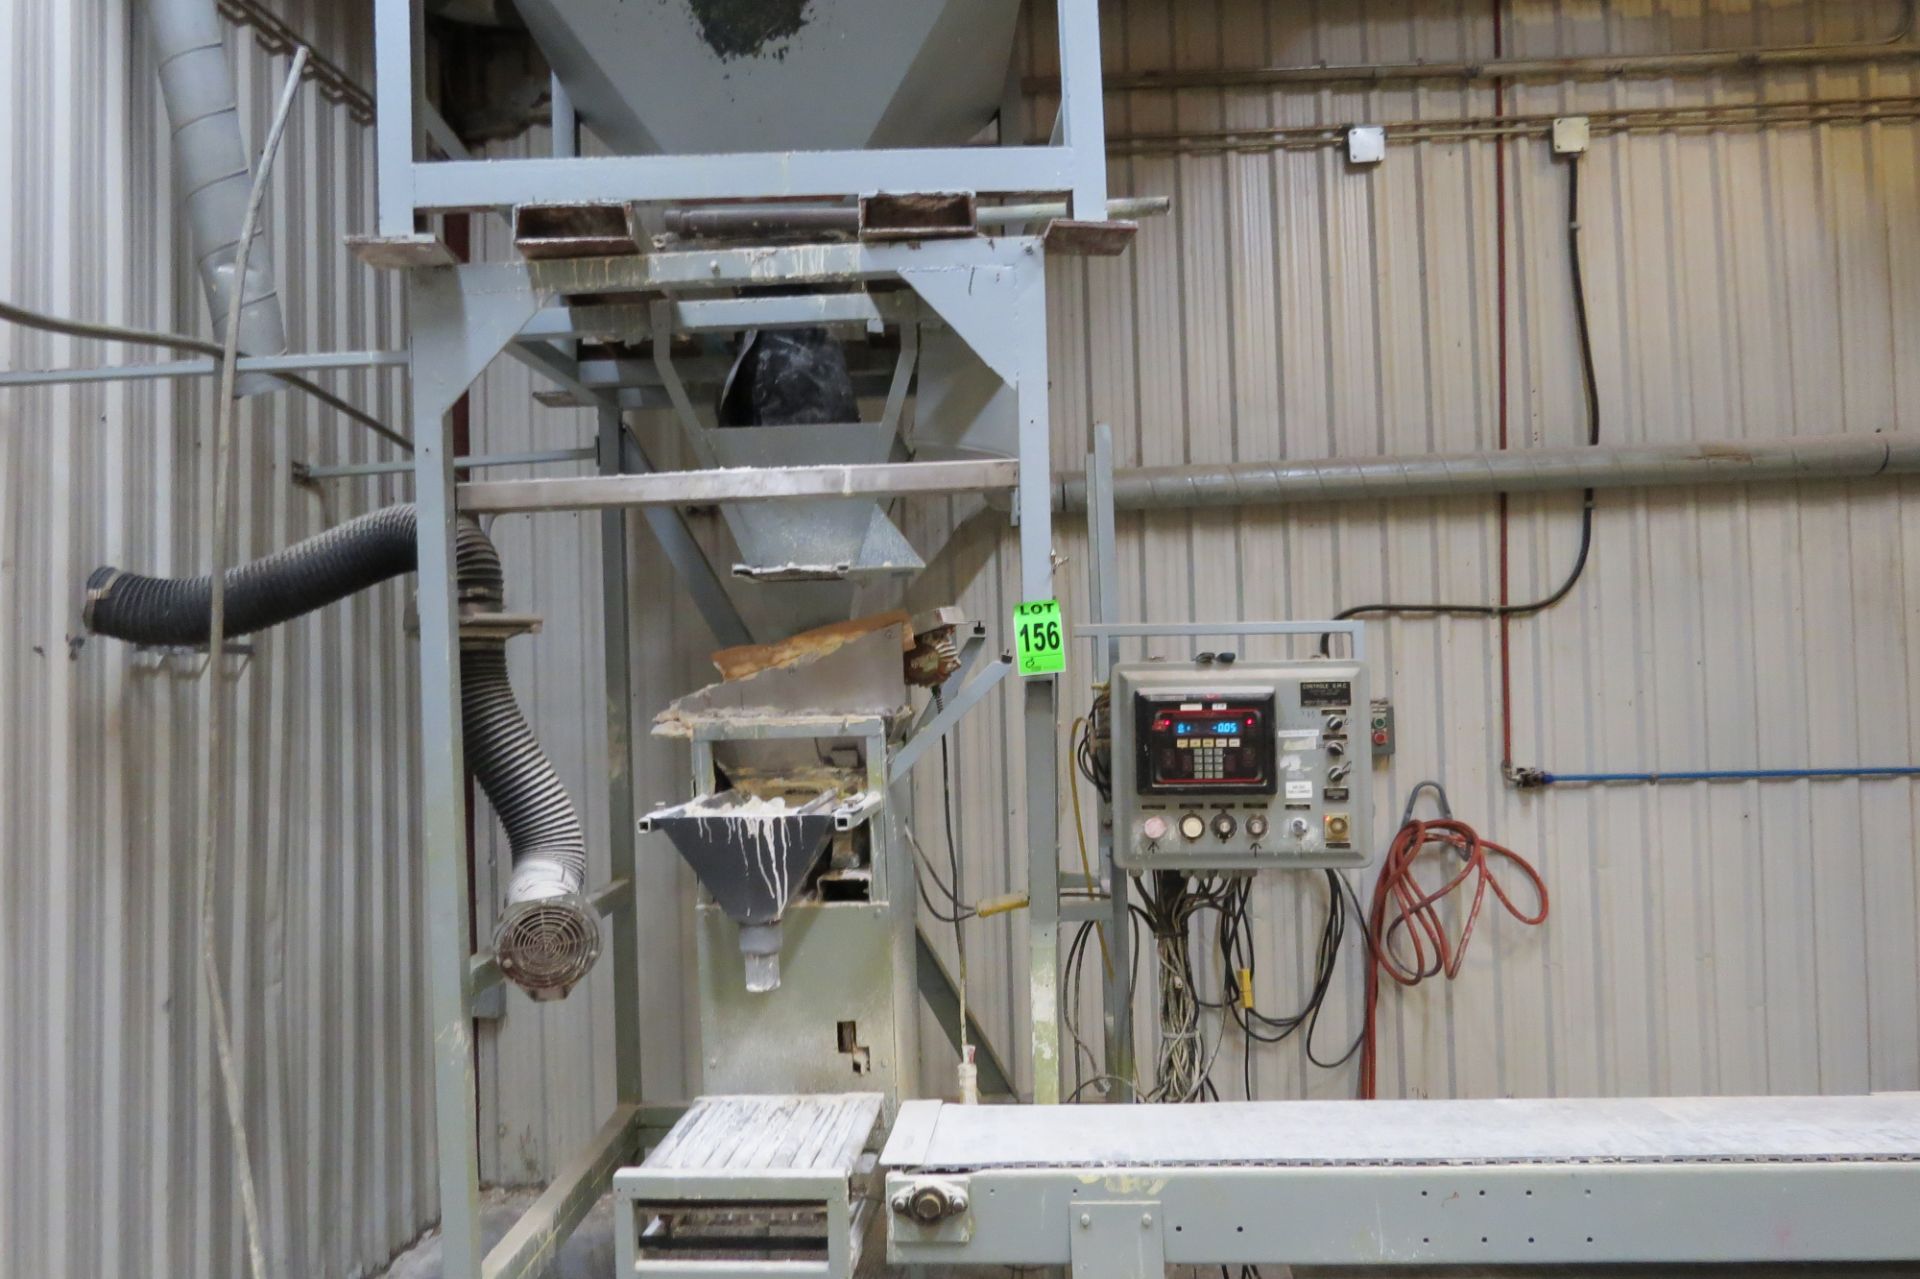 Custom powder filling machine with GMC Controller, hopper, conveyor - formerly used for caustic prod - Image 15 of 19